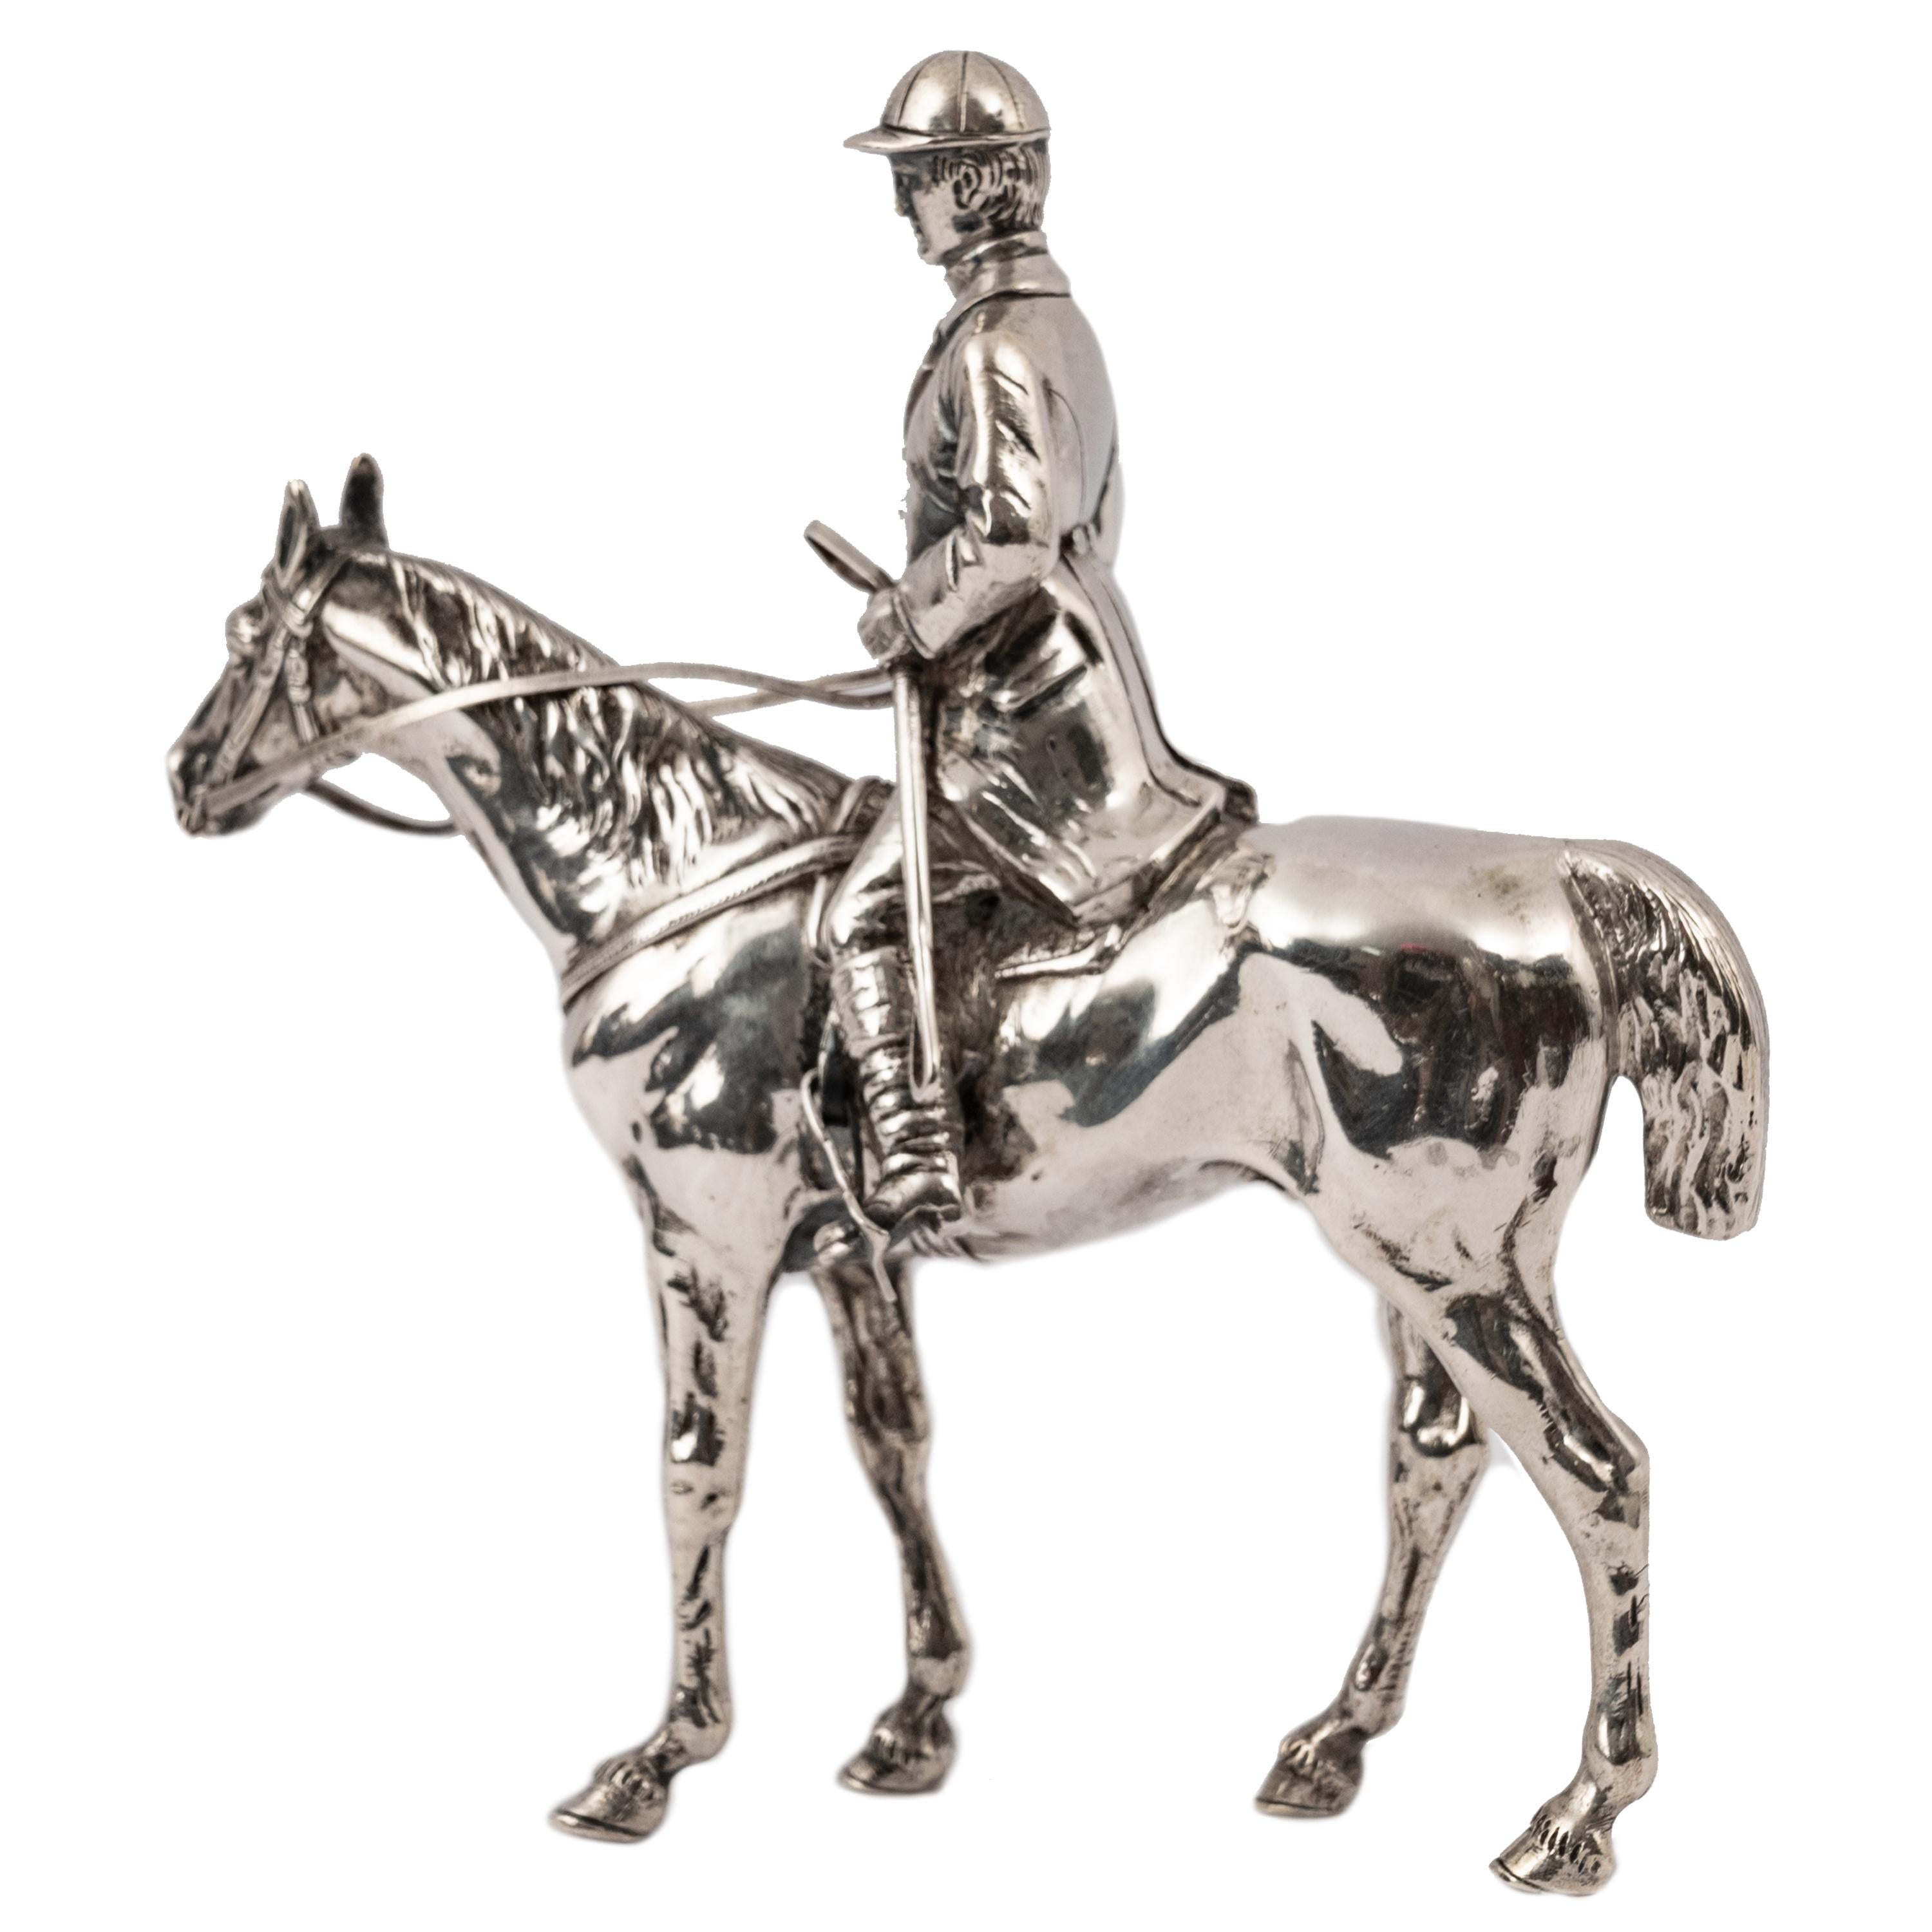 Antique Sterling Silver Equestrian Horse & Rider Dressage Statue Sculpture 1920 In Good Condition For Sale In Portland, OR